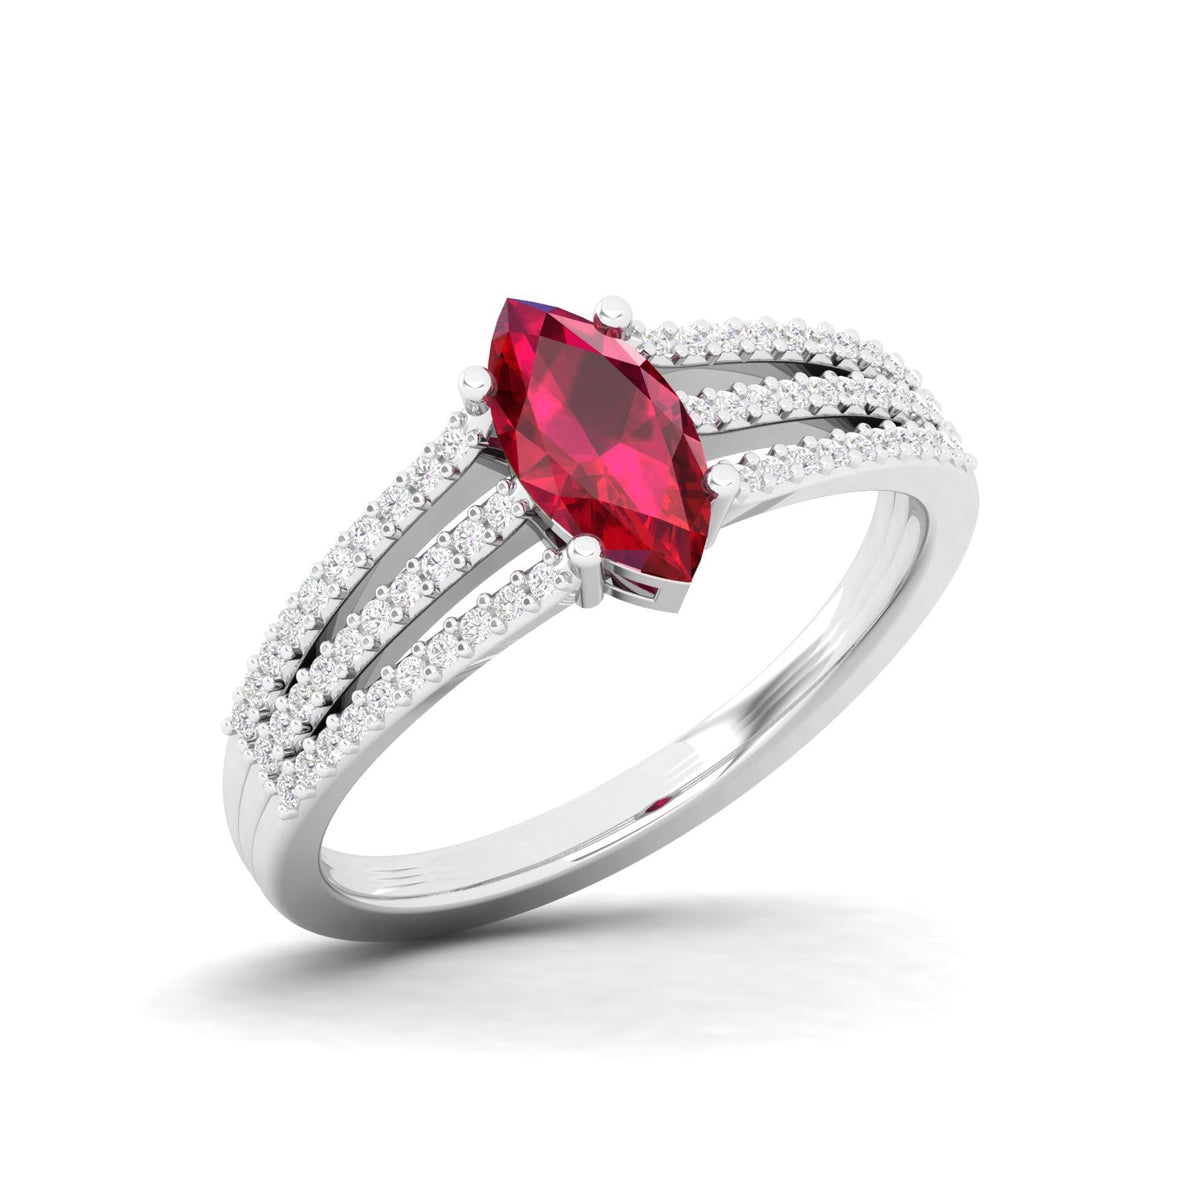 Maurya Third Eye Solitaire Ruby Split Shank Engagement Ring with Accent Diamonds